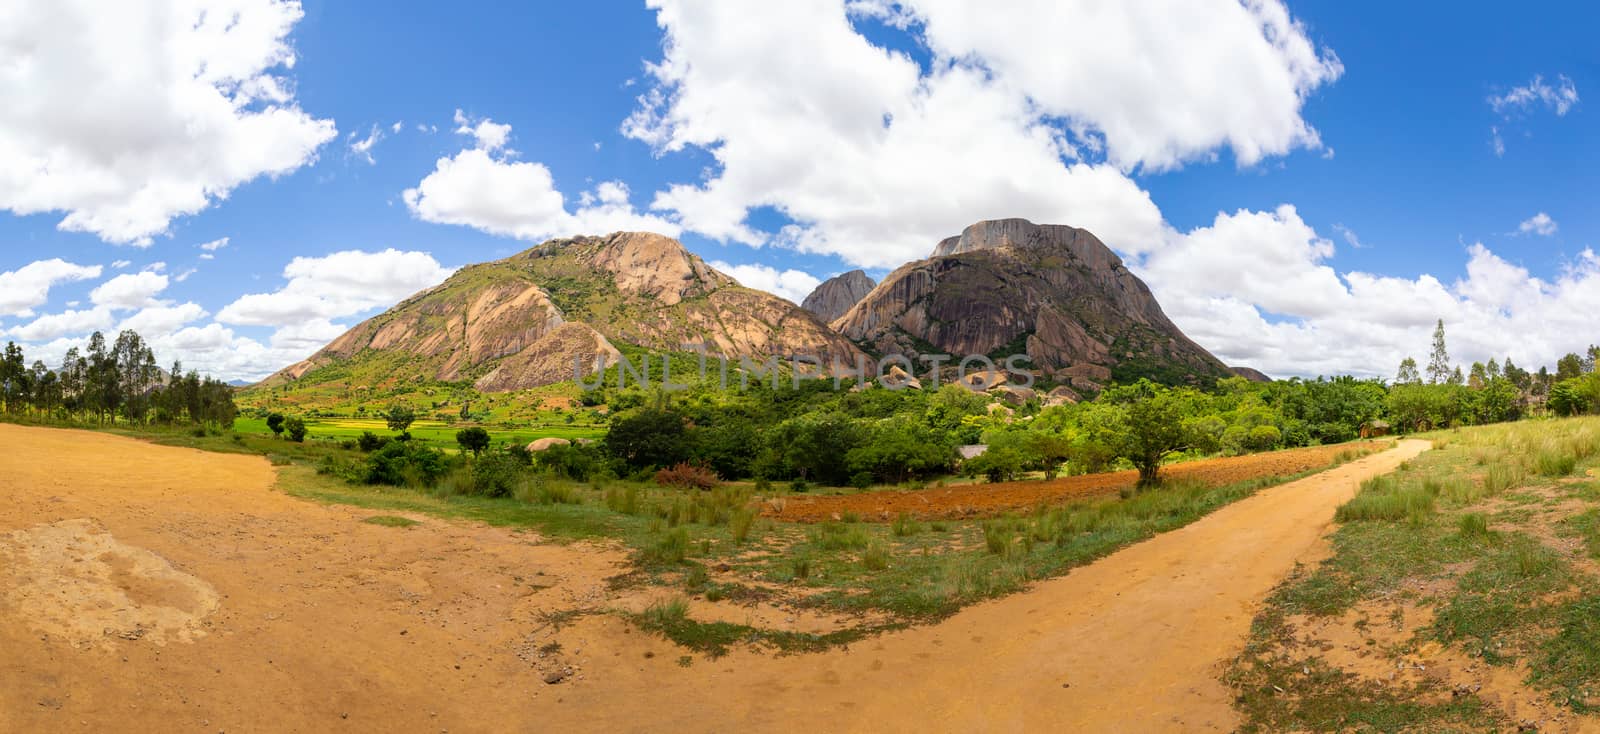 Panoramic image of the landscape on the island of Madagascar by 25ehaag6